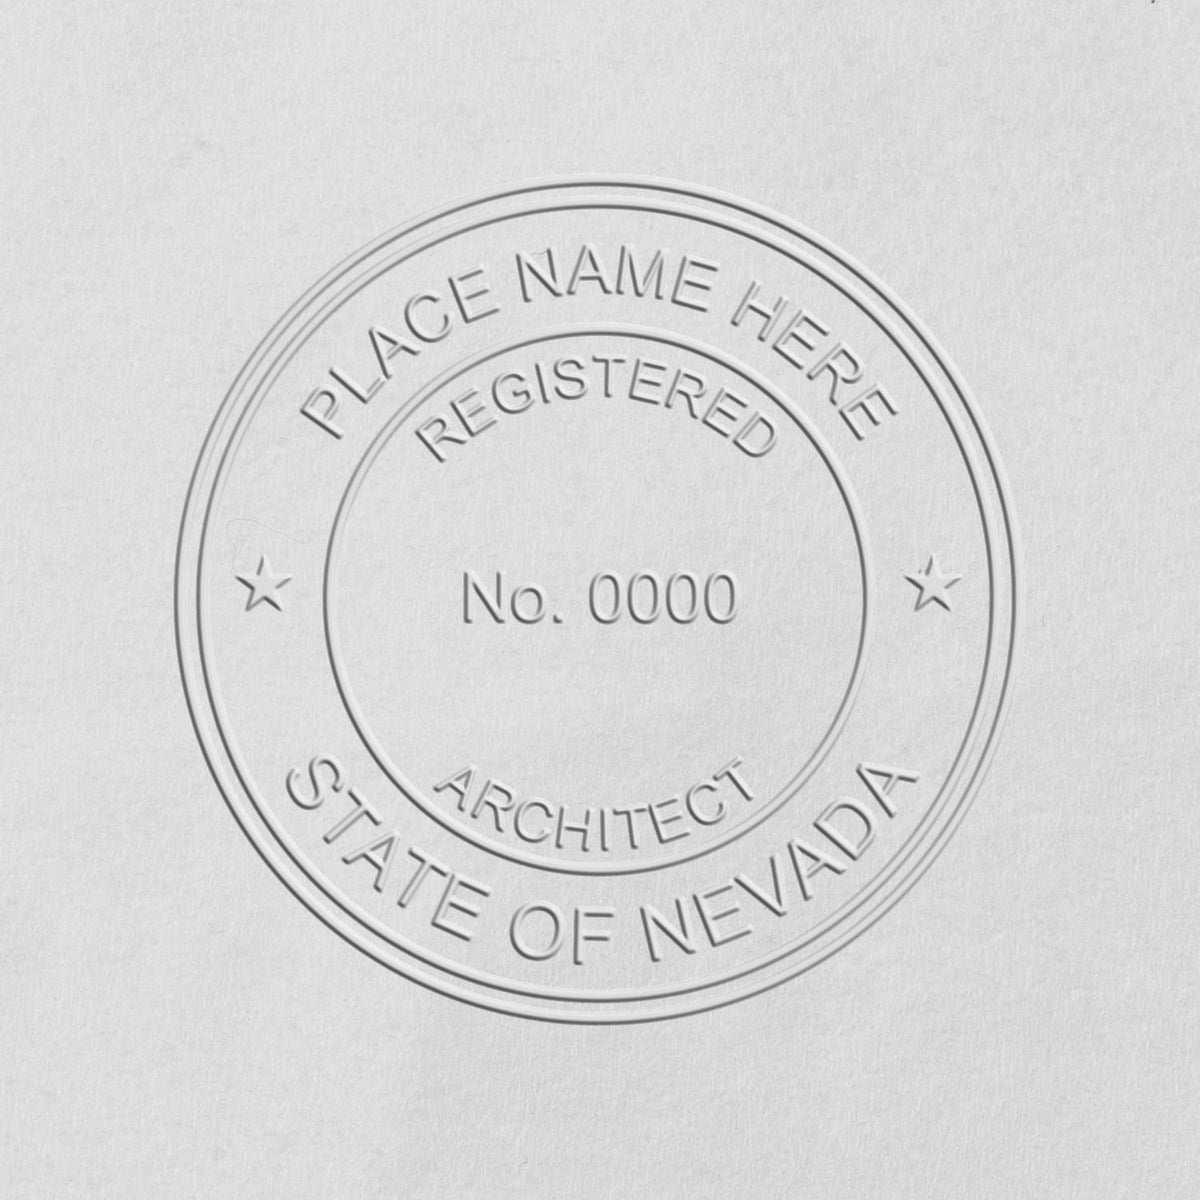 An in use photo of the Hybrid Nevada Architect Seal showing a sample imprint on a cardstock